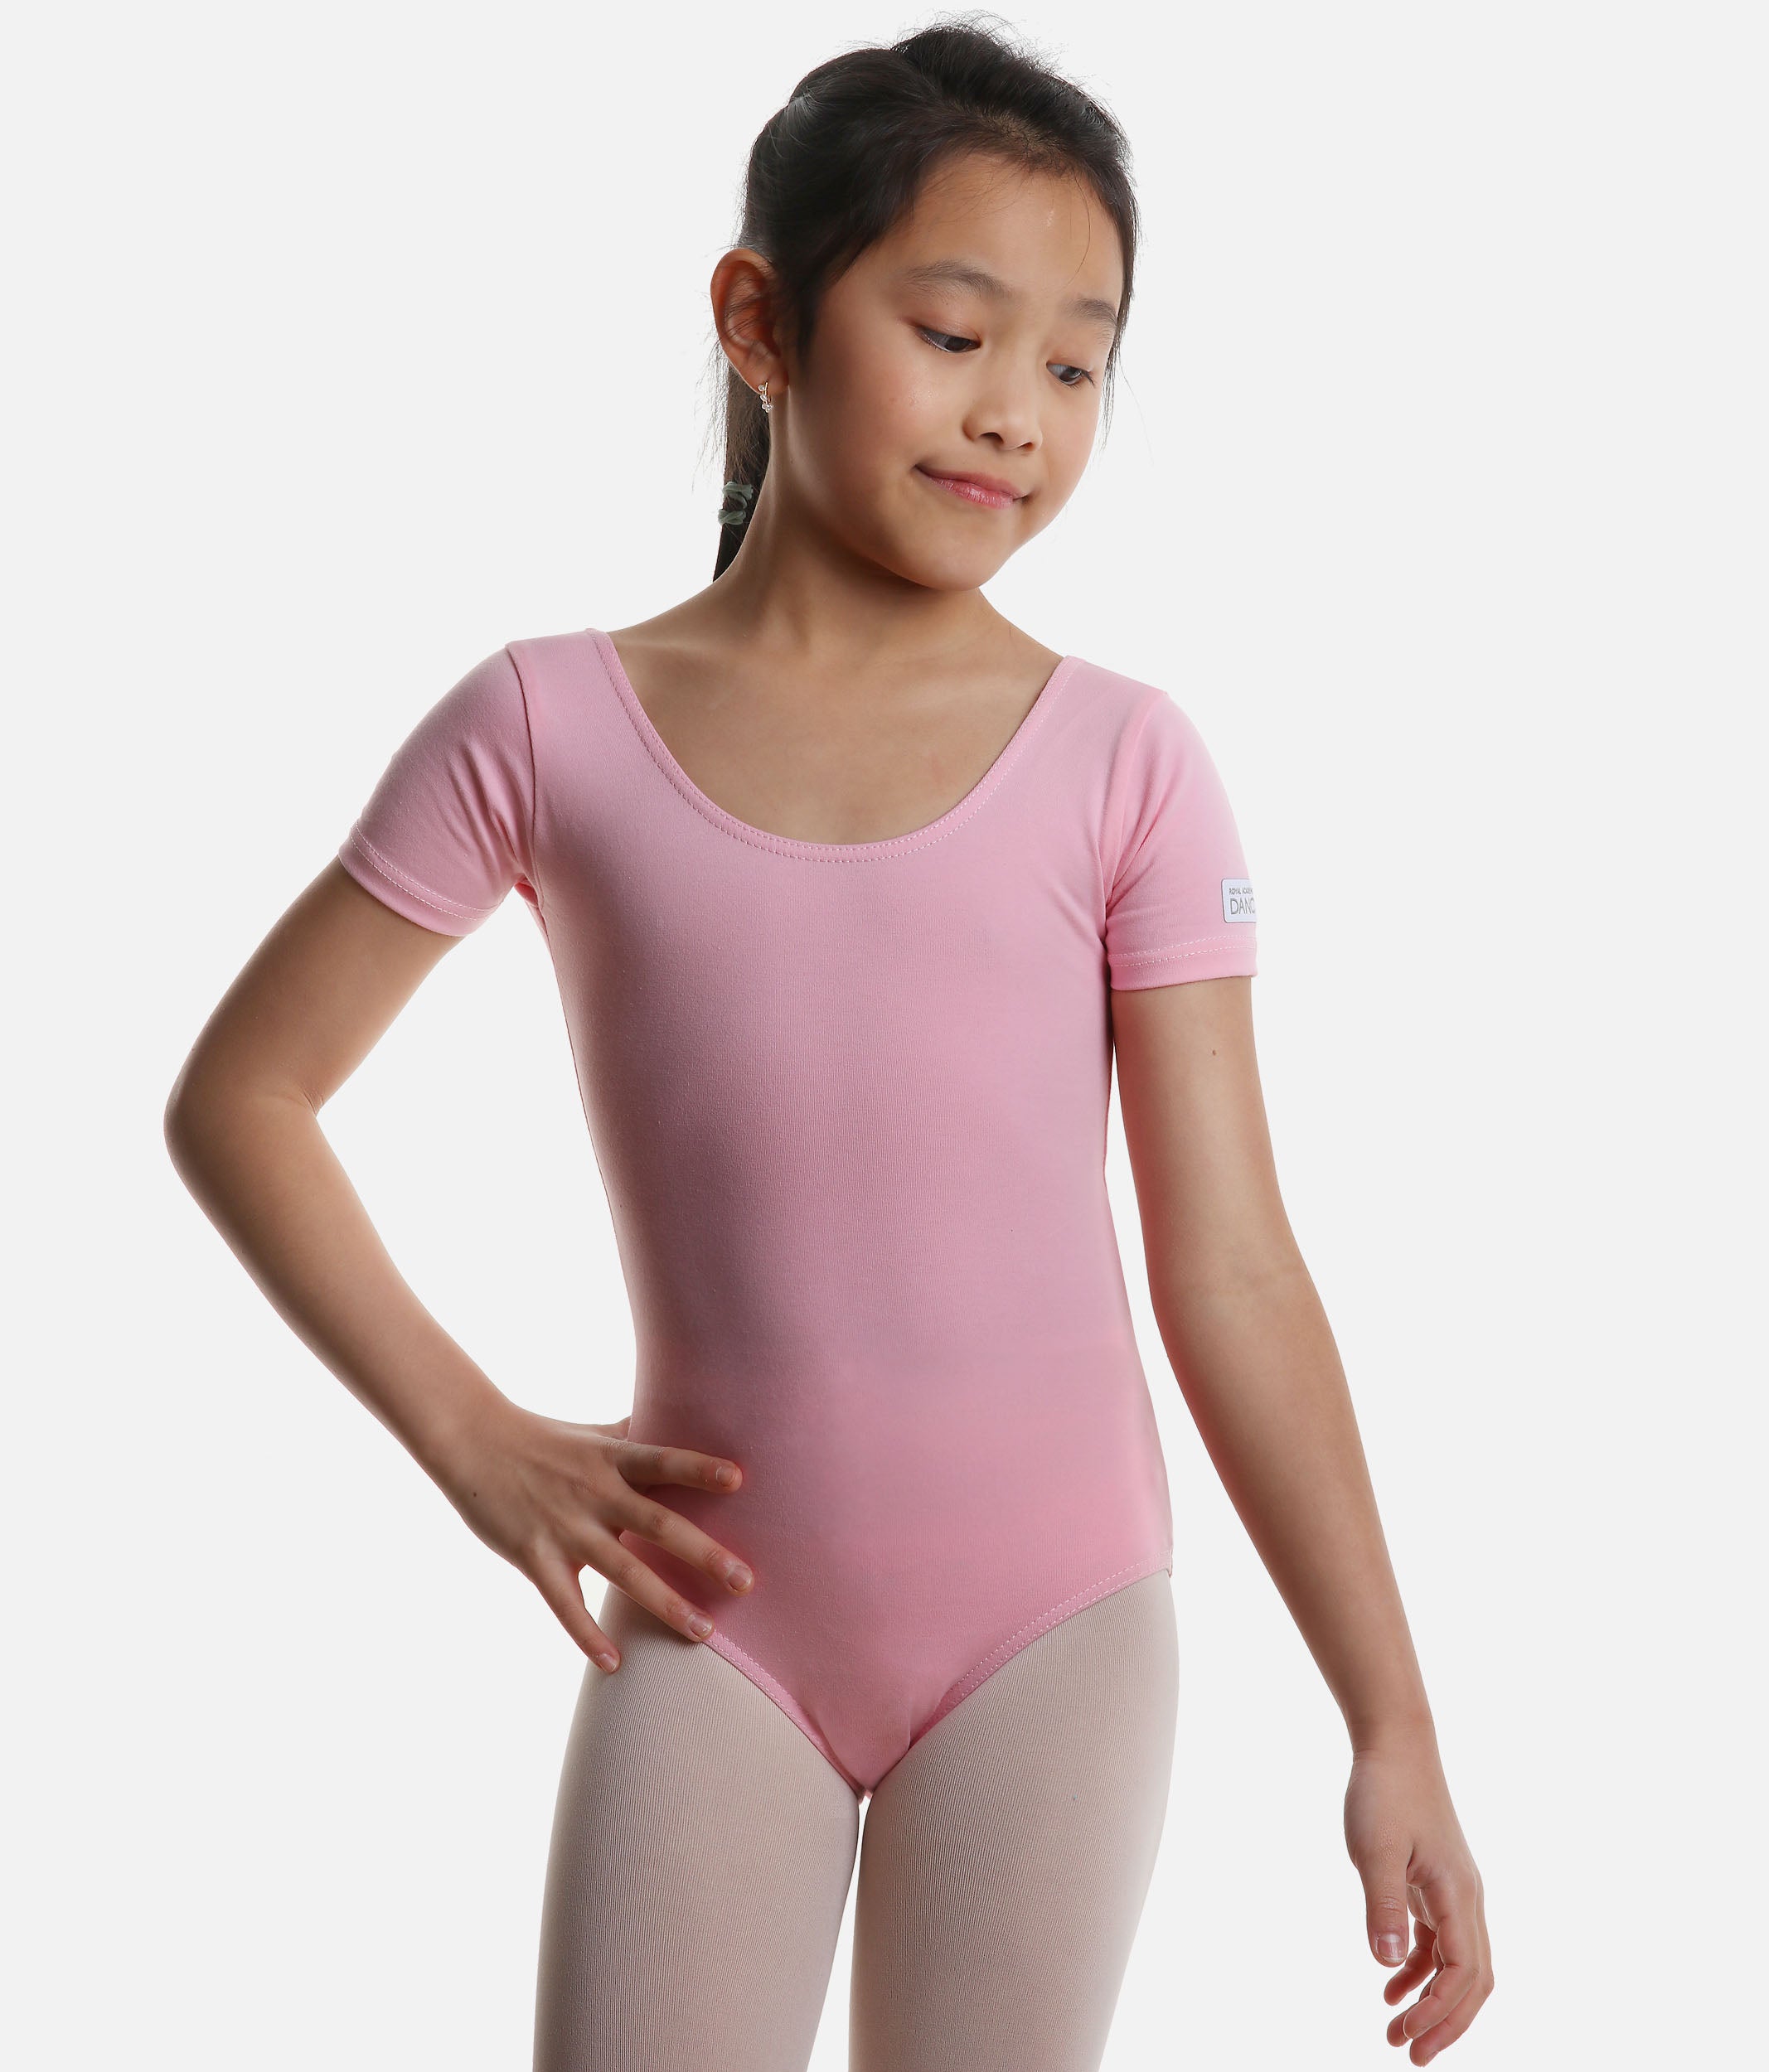 St7 Footed Ballet Tights - Theatrical Pink - CHILD - Spangles Dancewear